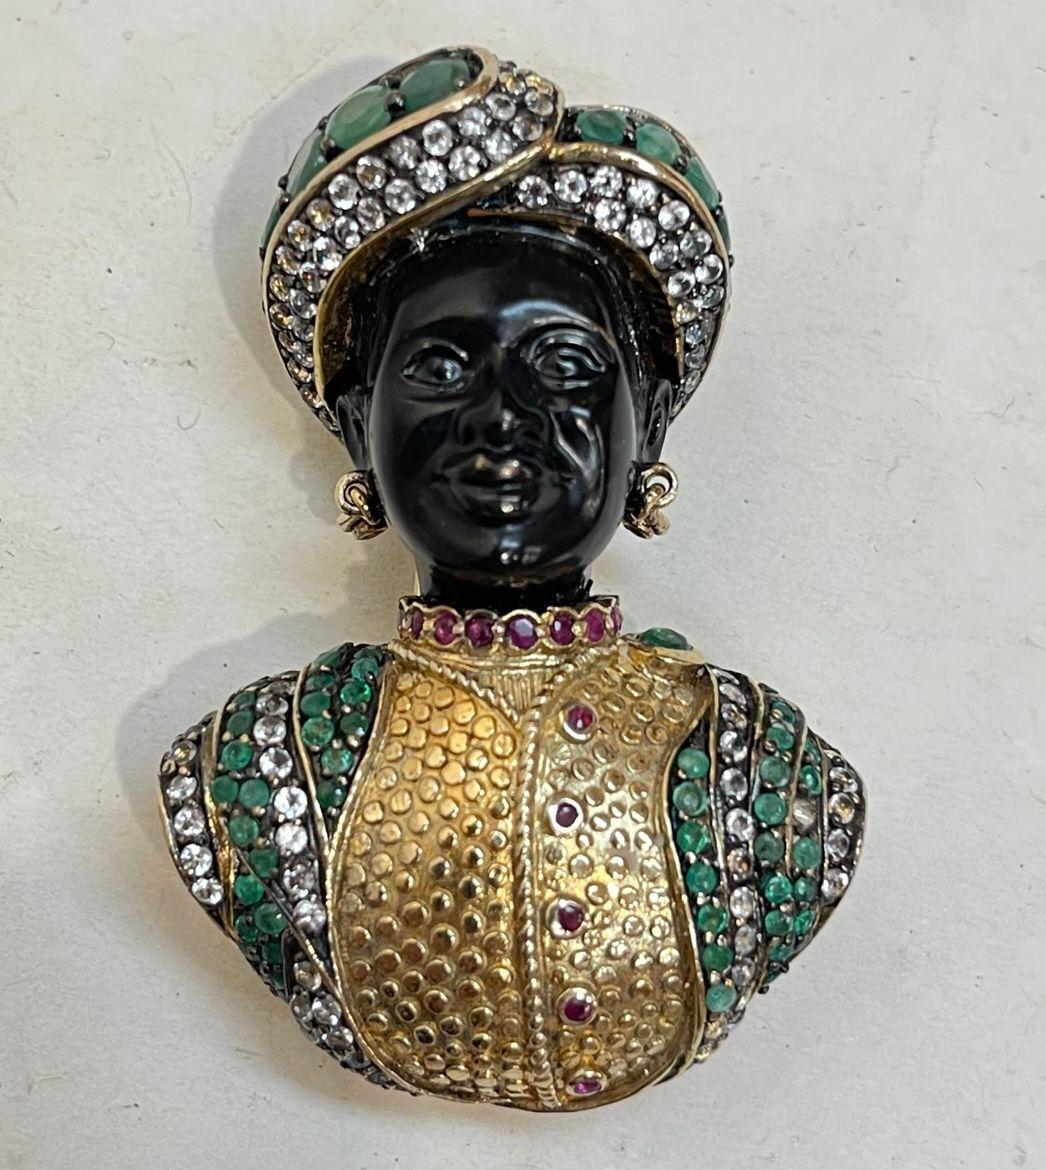 Simply Beautiful! Finely detailed 3-dimensional Vintage Designer Ruby, Pearl and Amethyst Nubian Prince Brooch. Securely Hand set with Emeralds and Rubies, enhanced with Diamante Crystals and a faceted Amethyst in the Headdress. Artistically Hand